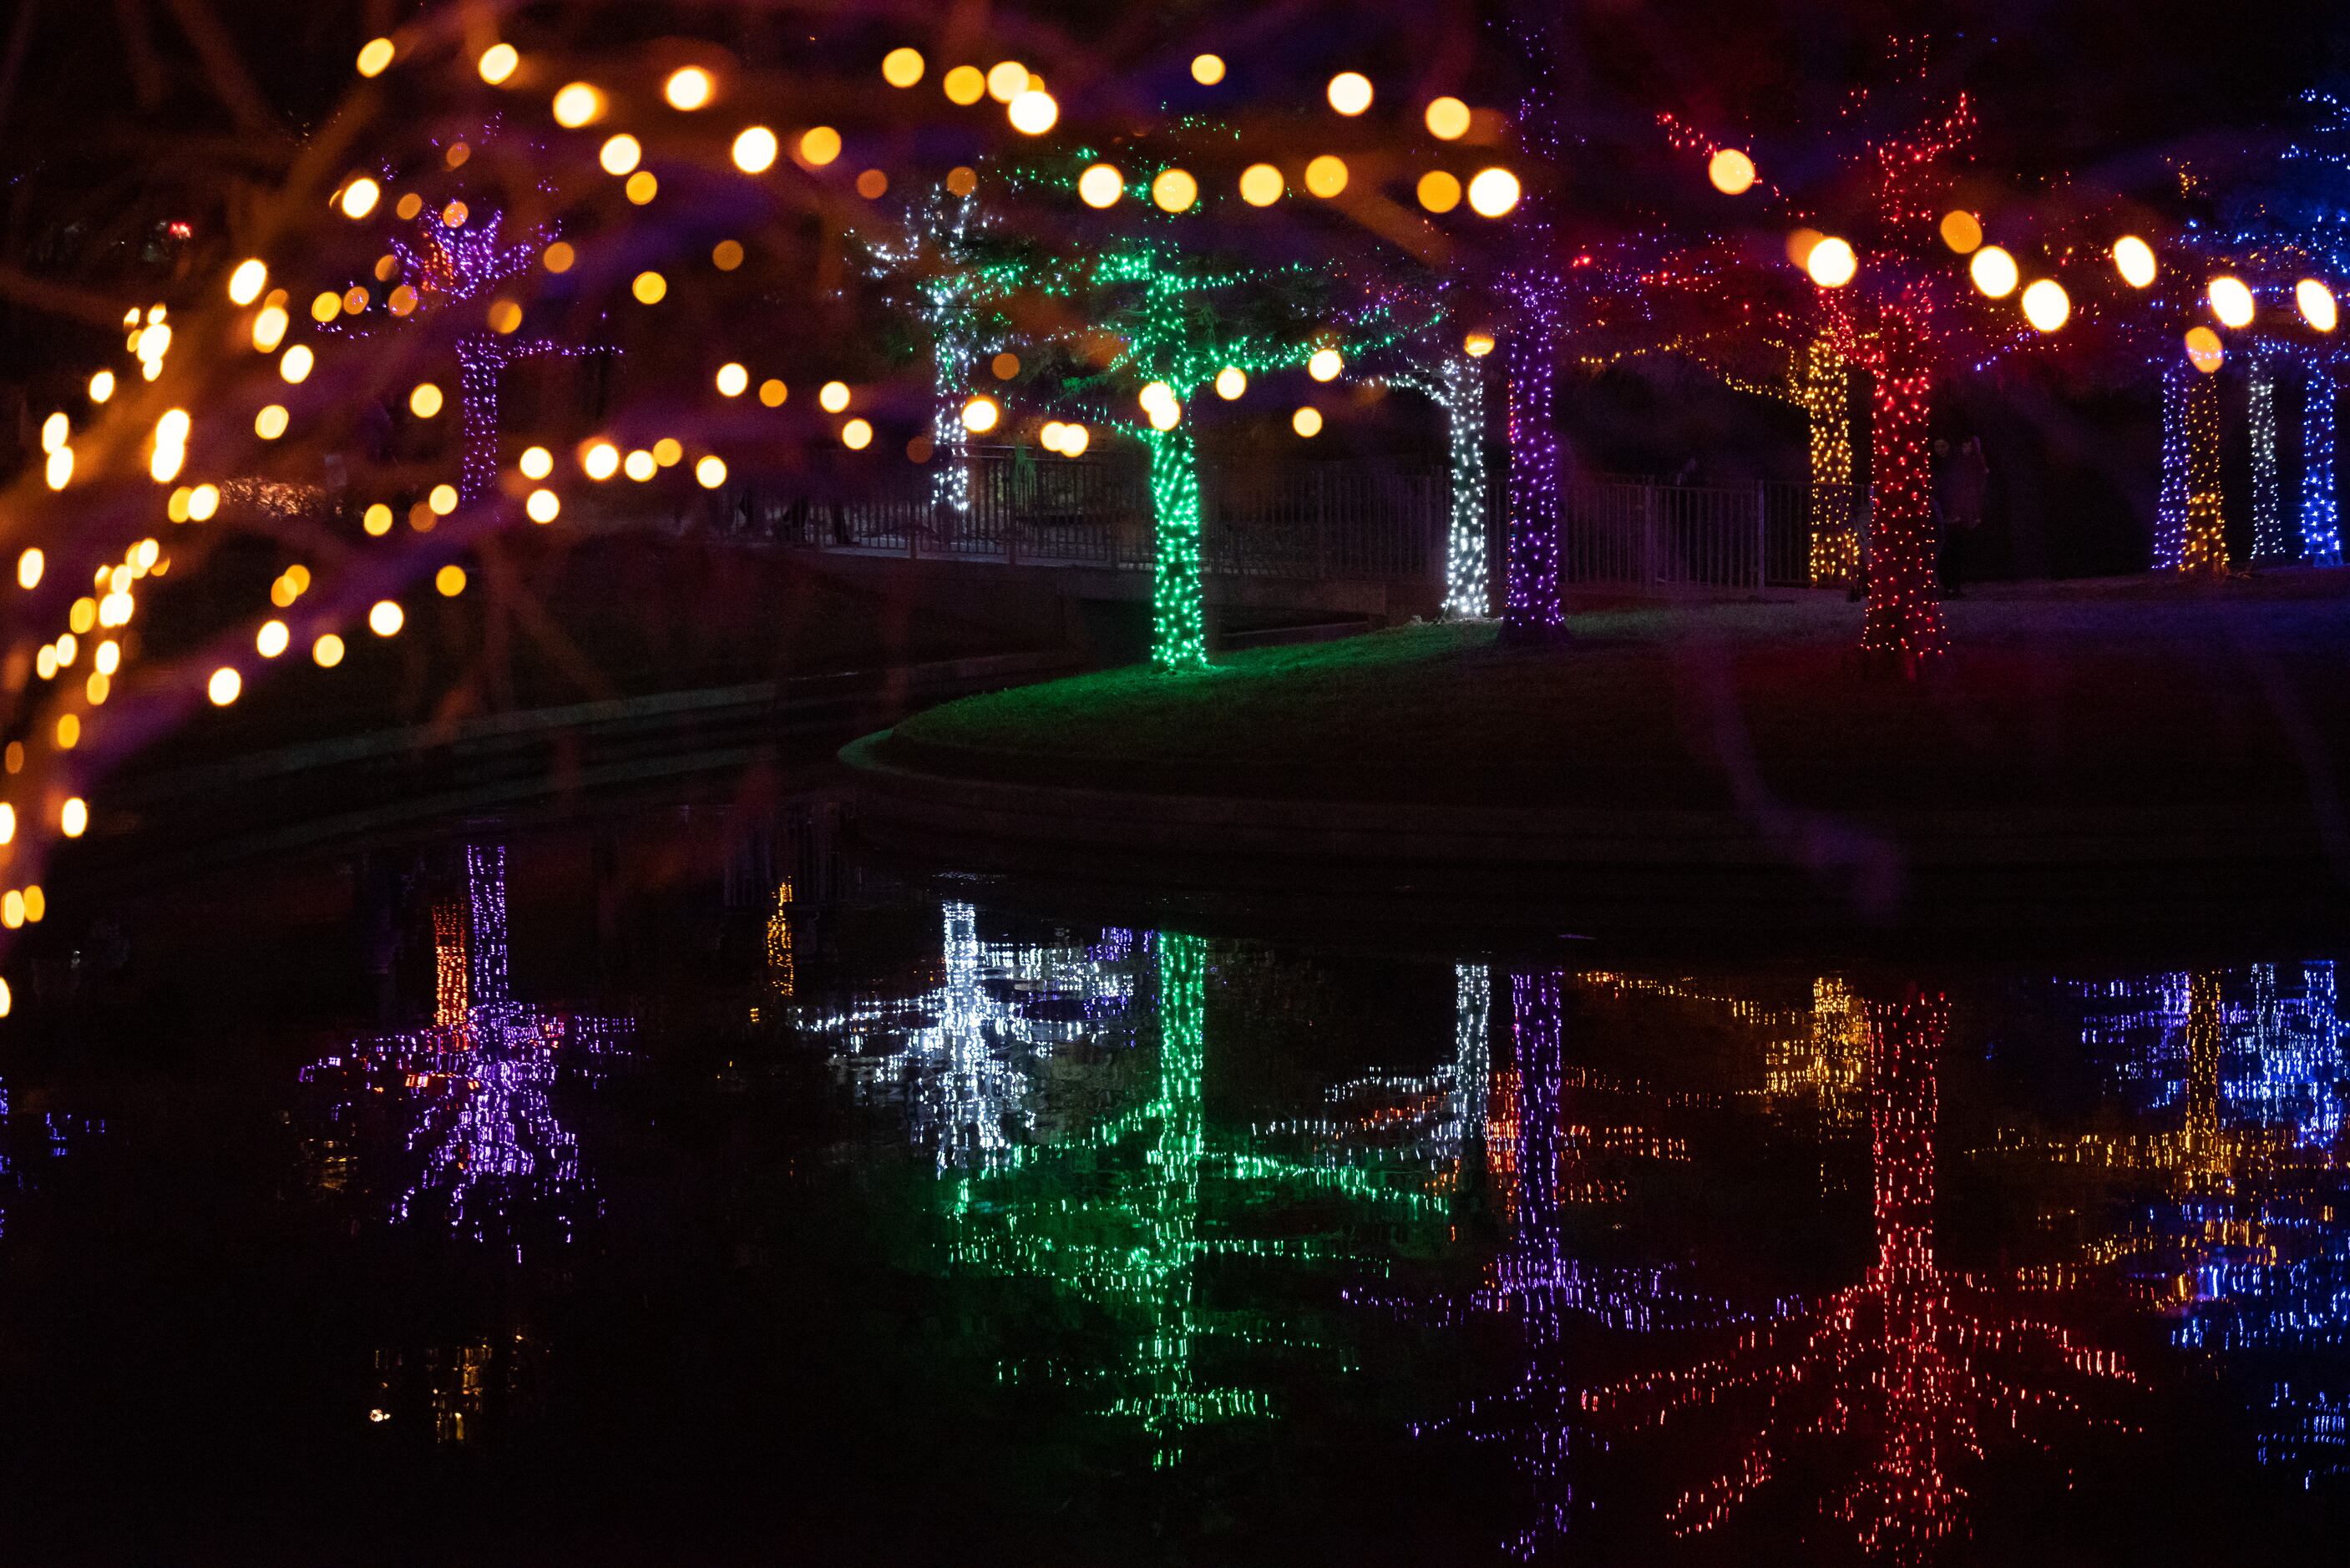 Stroll through Vitruvian Park’s 12 acres to see more than 550 illuminated trees wrapped in...